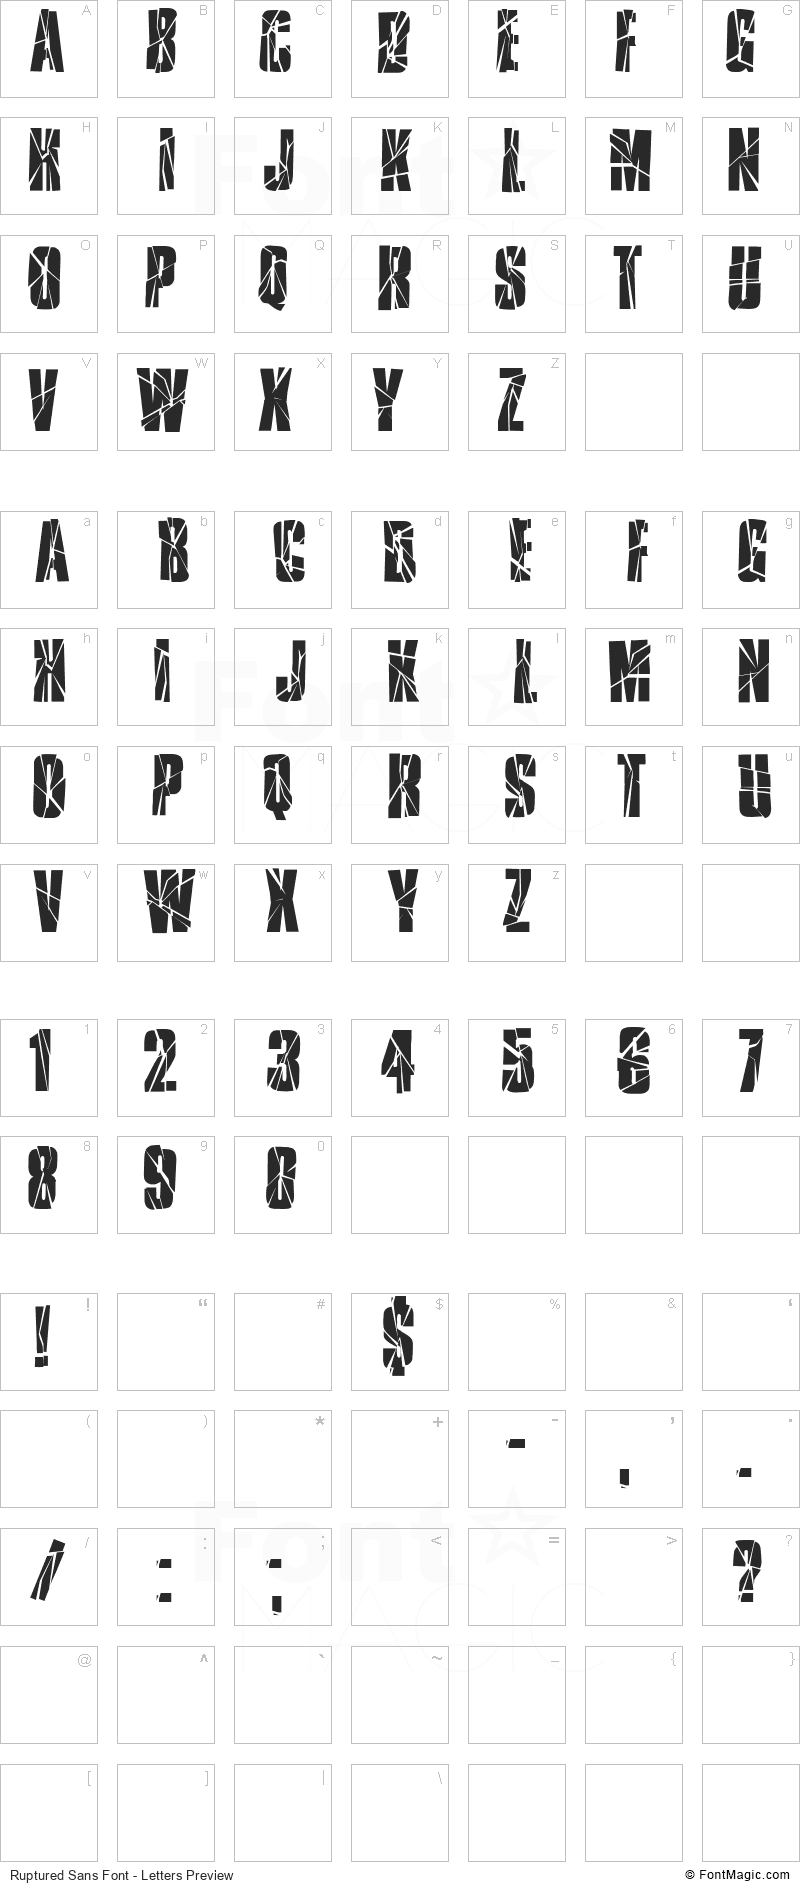 Ruptured Sans Font - All Latters Preview Chart